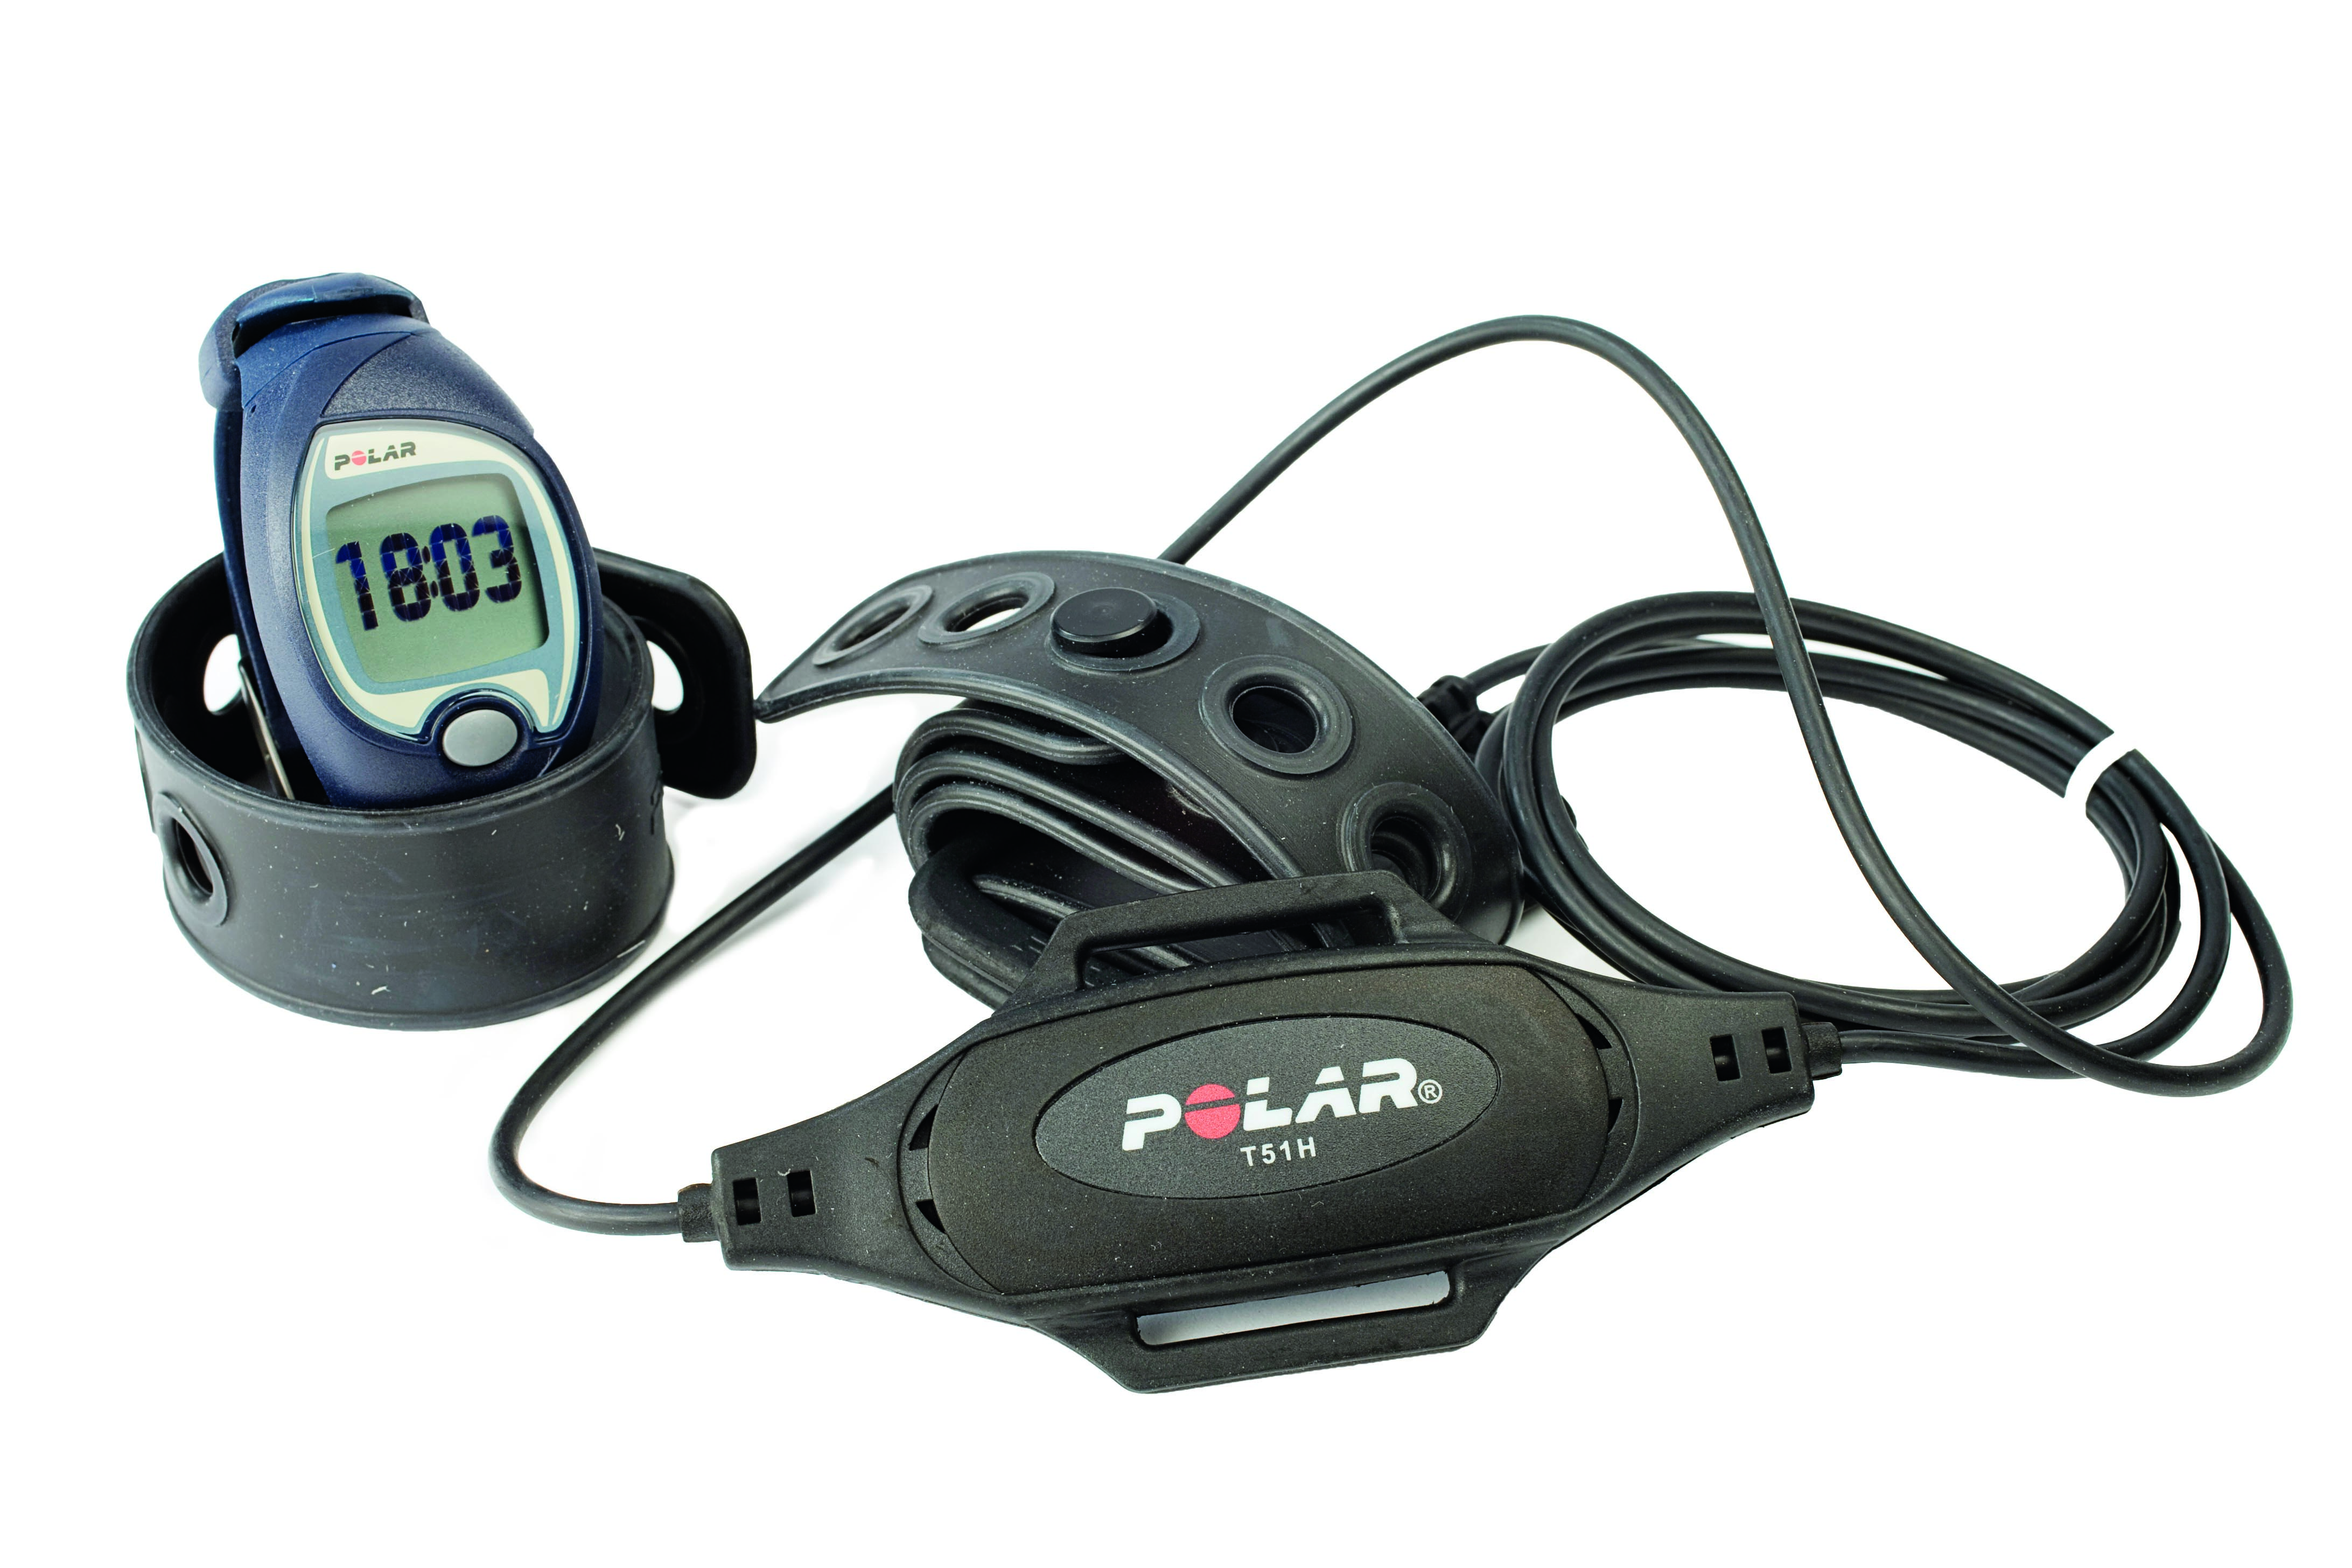 Polar-Equine-Easy-heart-rate-monitor